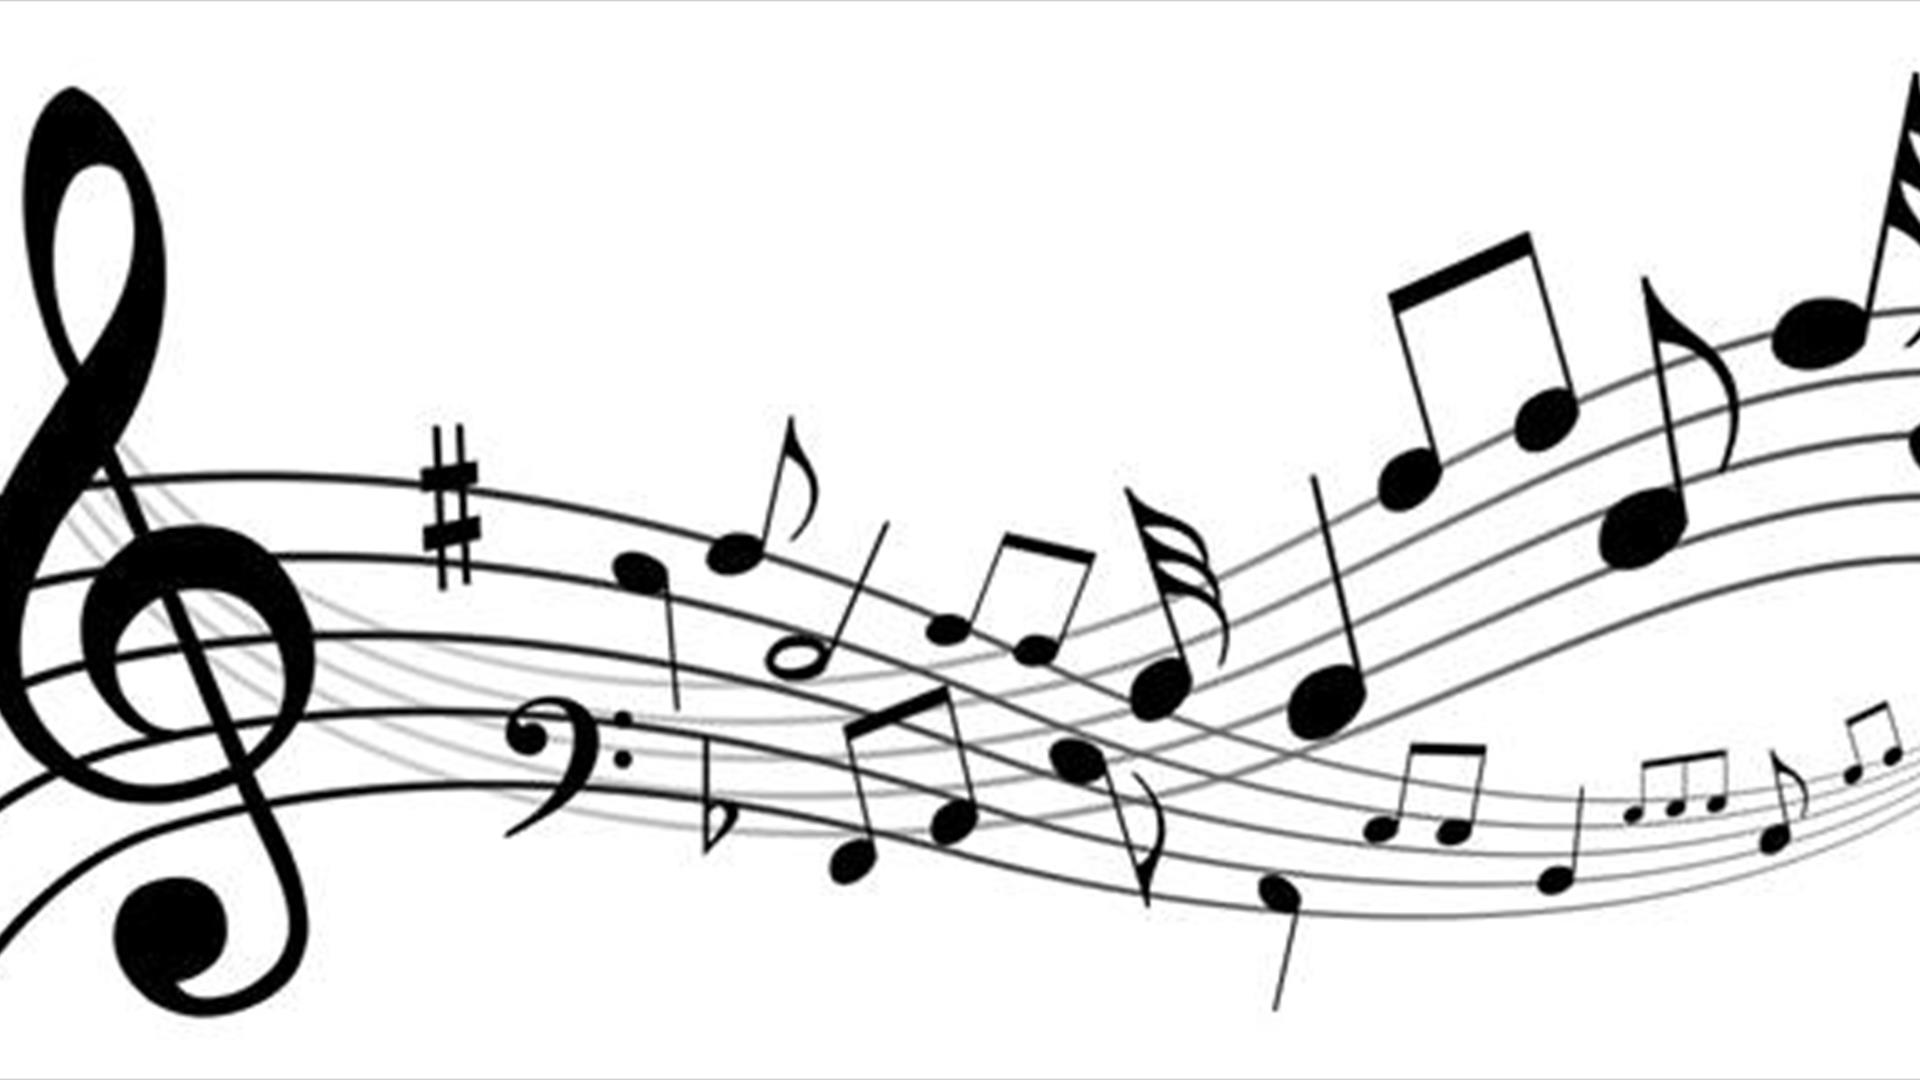 Image shows set of musical notes